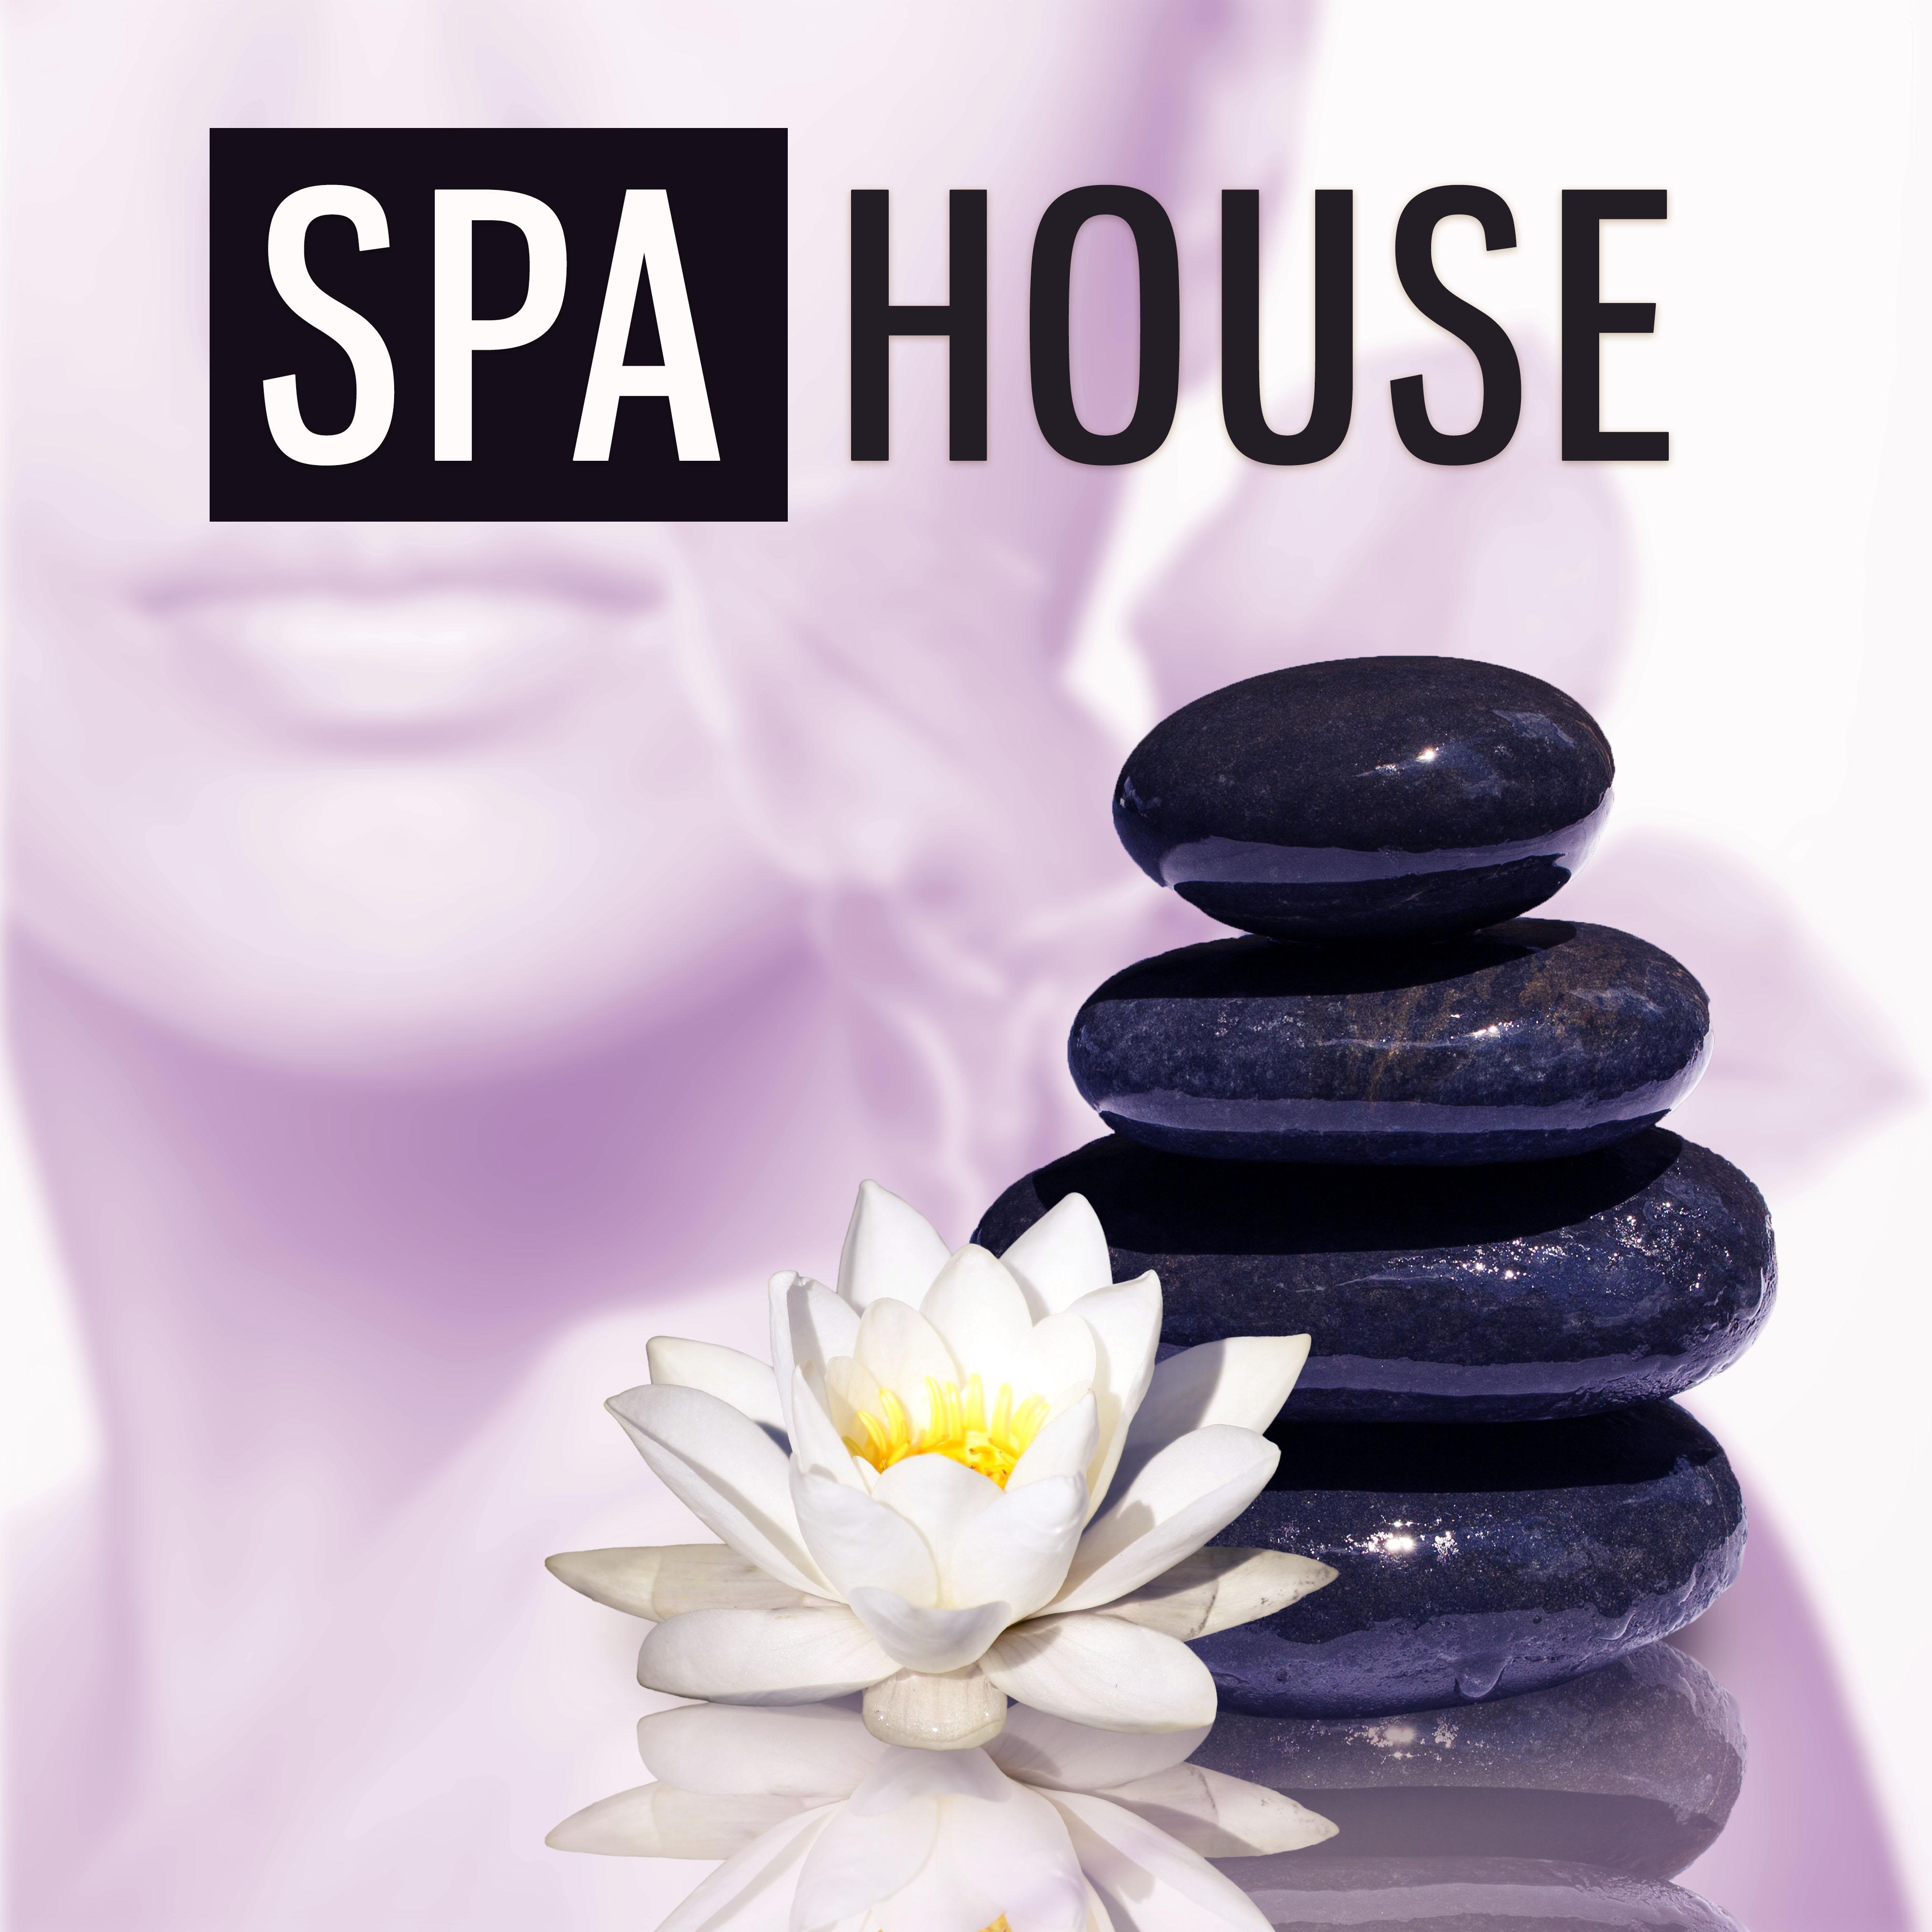 Spa House – Calming Nature Sounds for Spa & Wellness, Spa Hotel Music, Deep Relaxing Music, Touch of Nature, Sounds of the Birds And Ocean Waves, Full Relaxing New Age Music